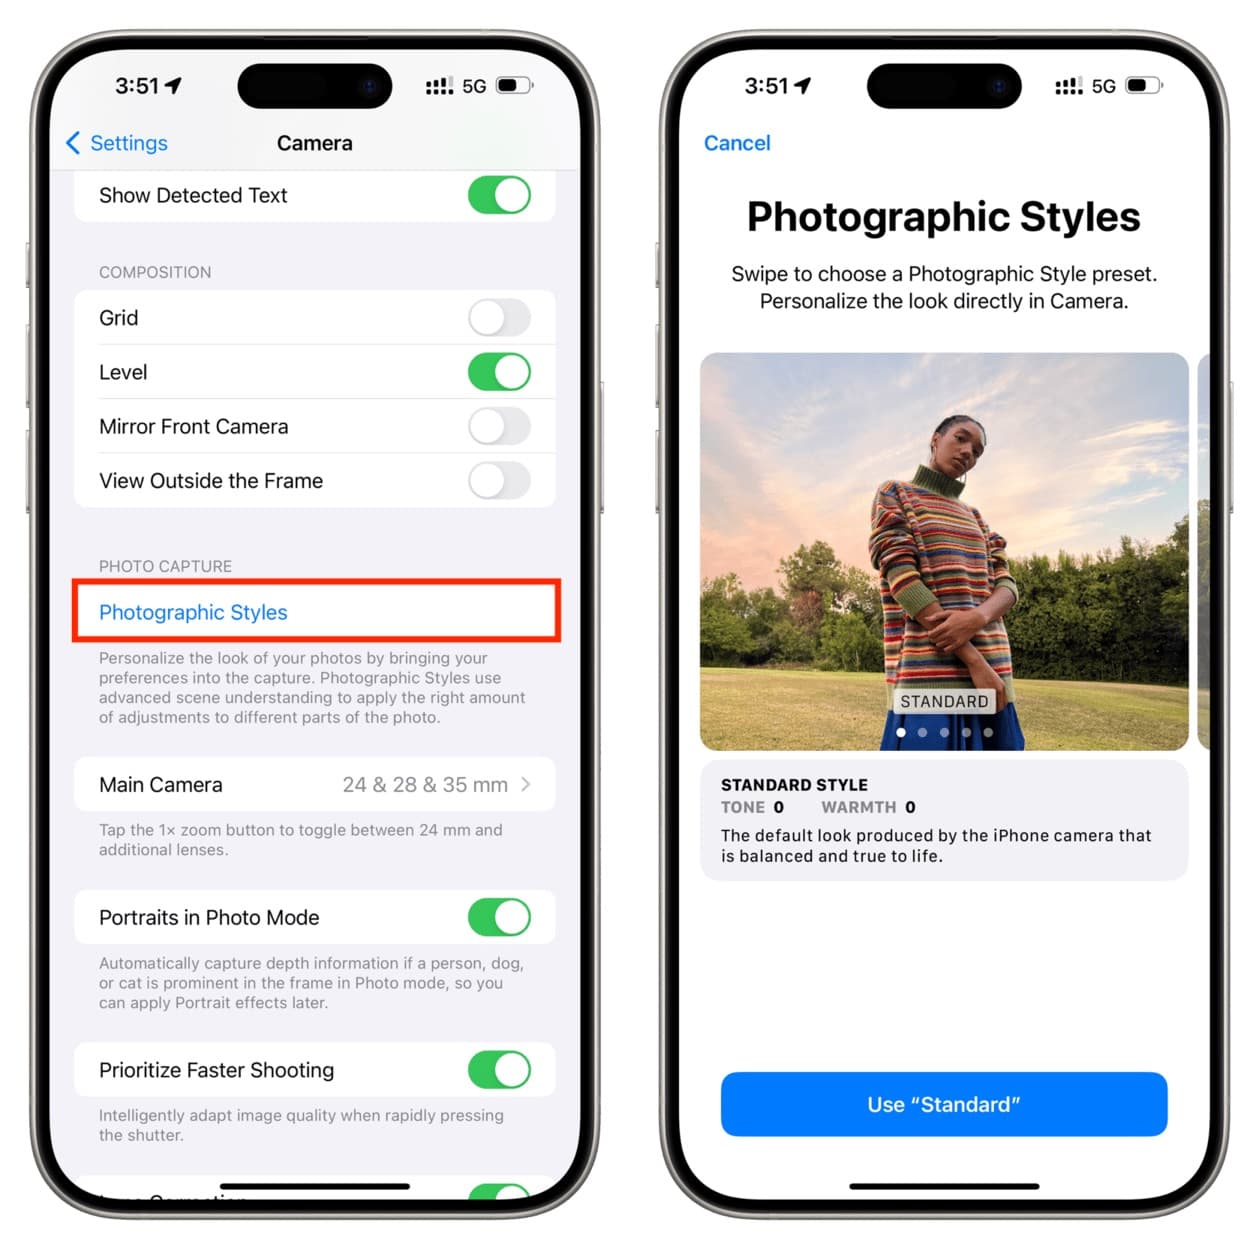 Photographic Styles in iPhone Camera settings